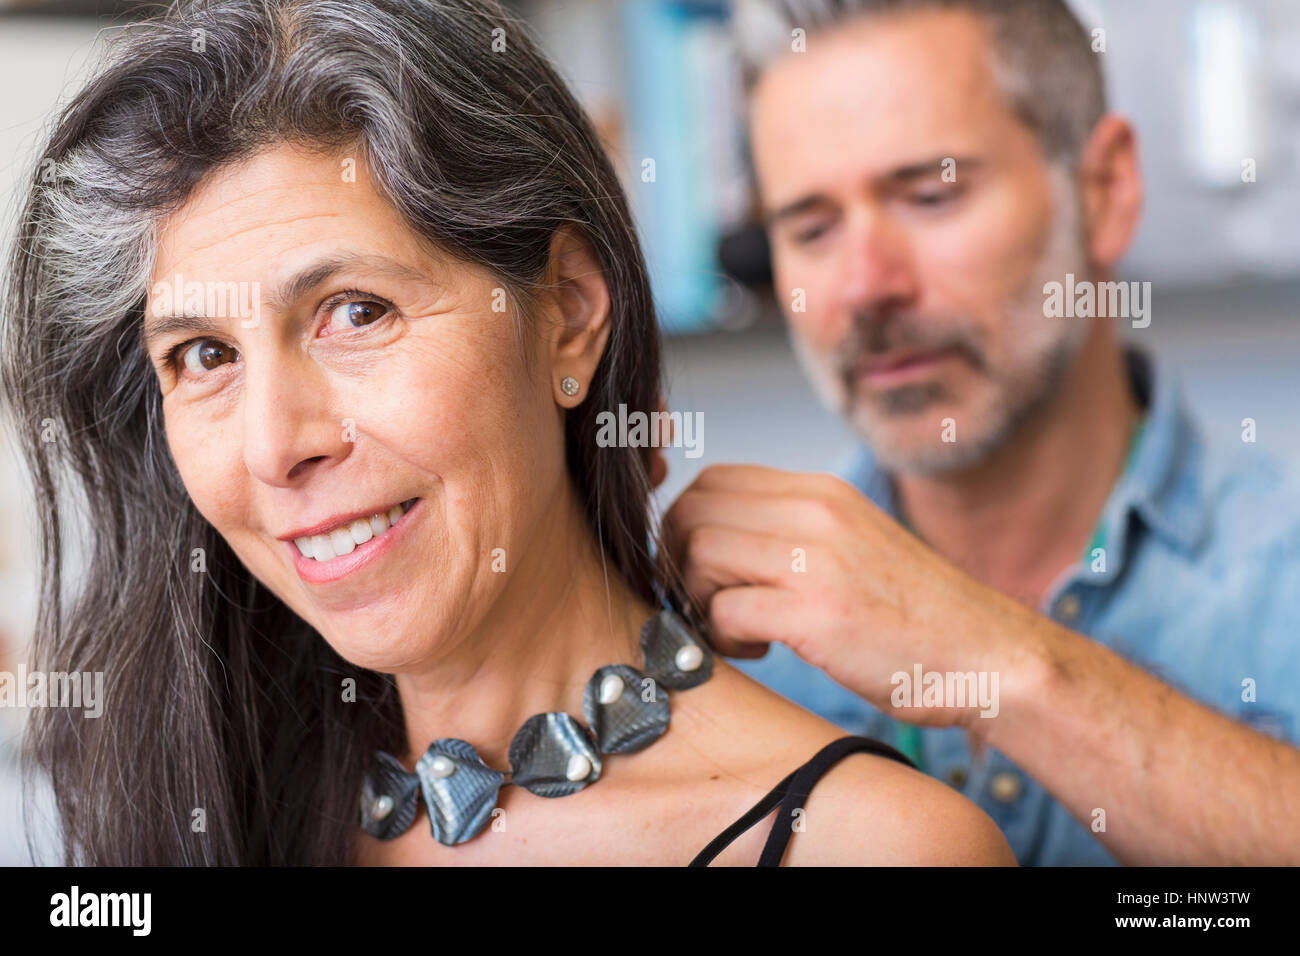 Man fastening necklace for woman Stock Photo